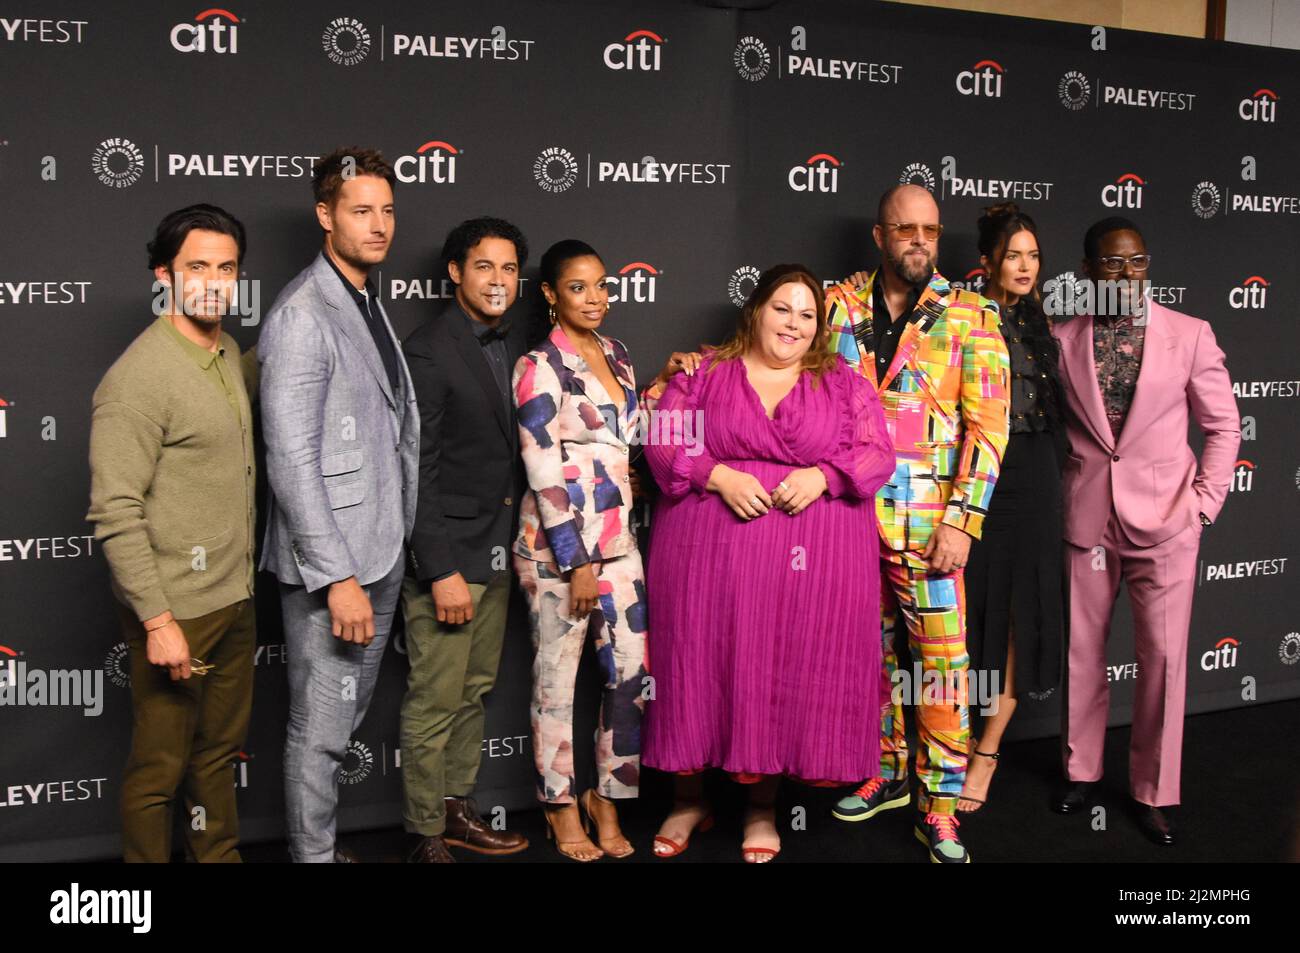 Hollywood, California, USA 2nd April 2022 (L-R) Actor Milo Ventimiglia, Actor Justin Hartley, Actor Jon Huertas, Actress Susan Kelechi Watson, Actress Chrissy Metz, Actor Chris Sullivan, Actress Mandy Moore and Actor Sterling K. Brown attend The Paley Center For Media's 39th Annual Paleyfest 'This Is Us' at Dolby Theatre on April 2, 2022 in Hollywood, California, USA. Photo by Barry King/Alamy Live News Stock Photo